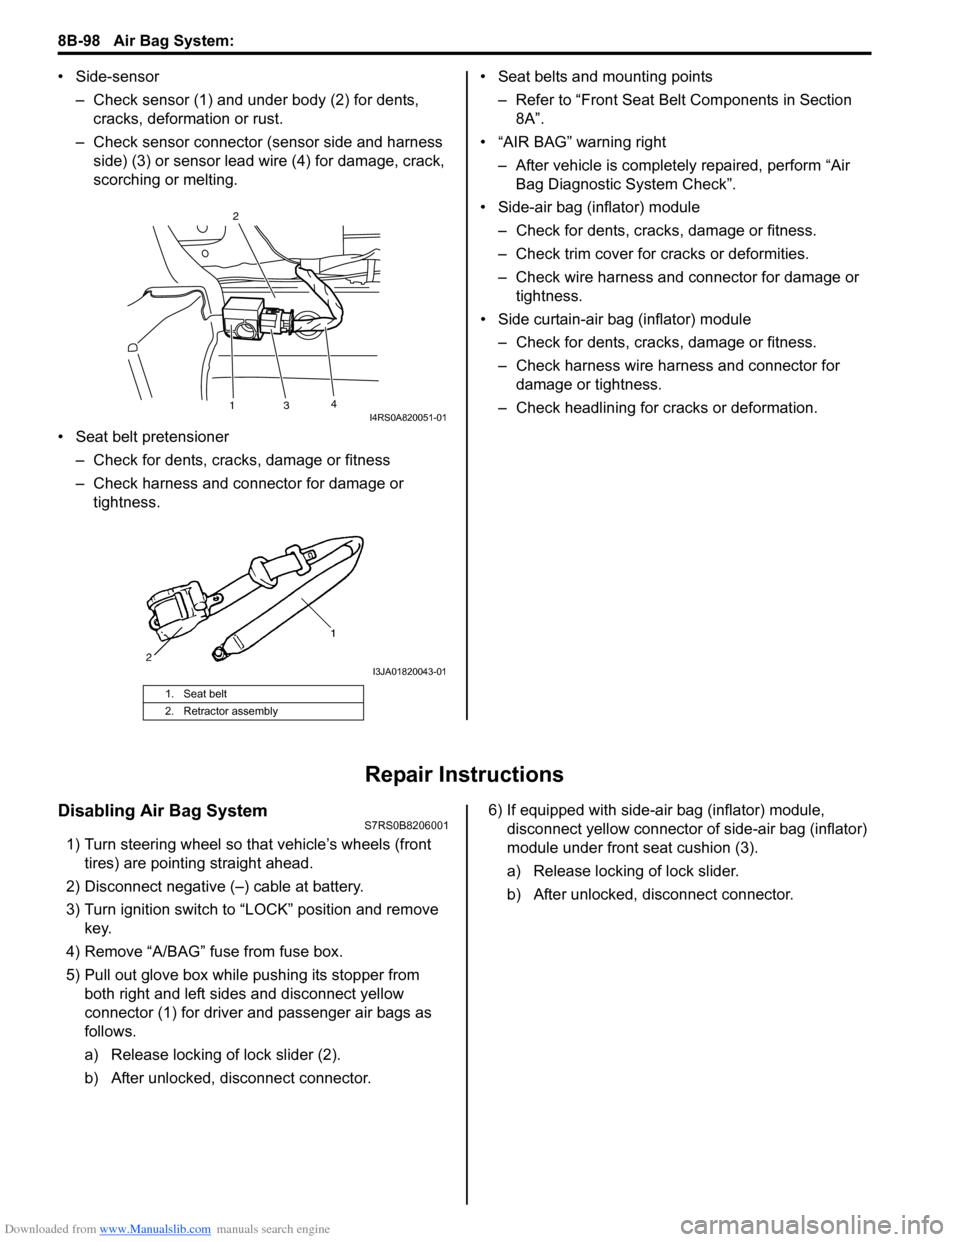 SUZUKI SWIFT 2006 2.G Service Service Manual Downloaded from www.Manualslib.com manuals search engine 8B-98 Air Bag System: 
• Side-sensor– Check sensor (1) and under body (2) for dents, cracks, deformation or rust.
– Check sensor connecto